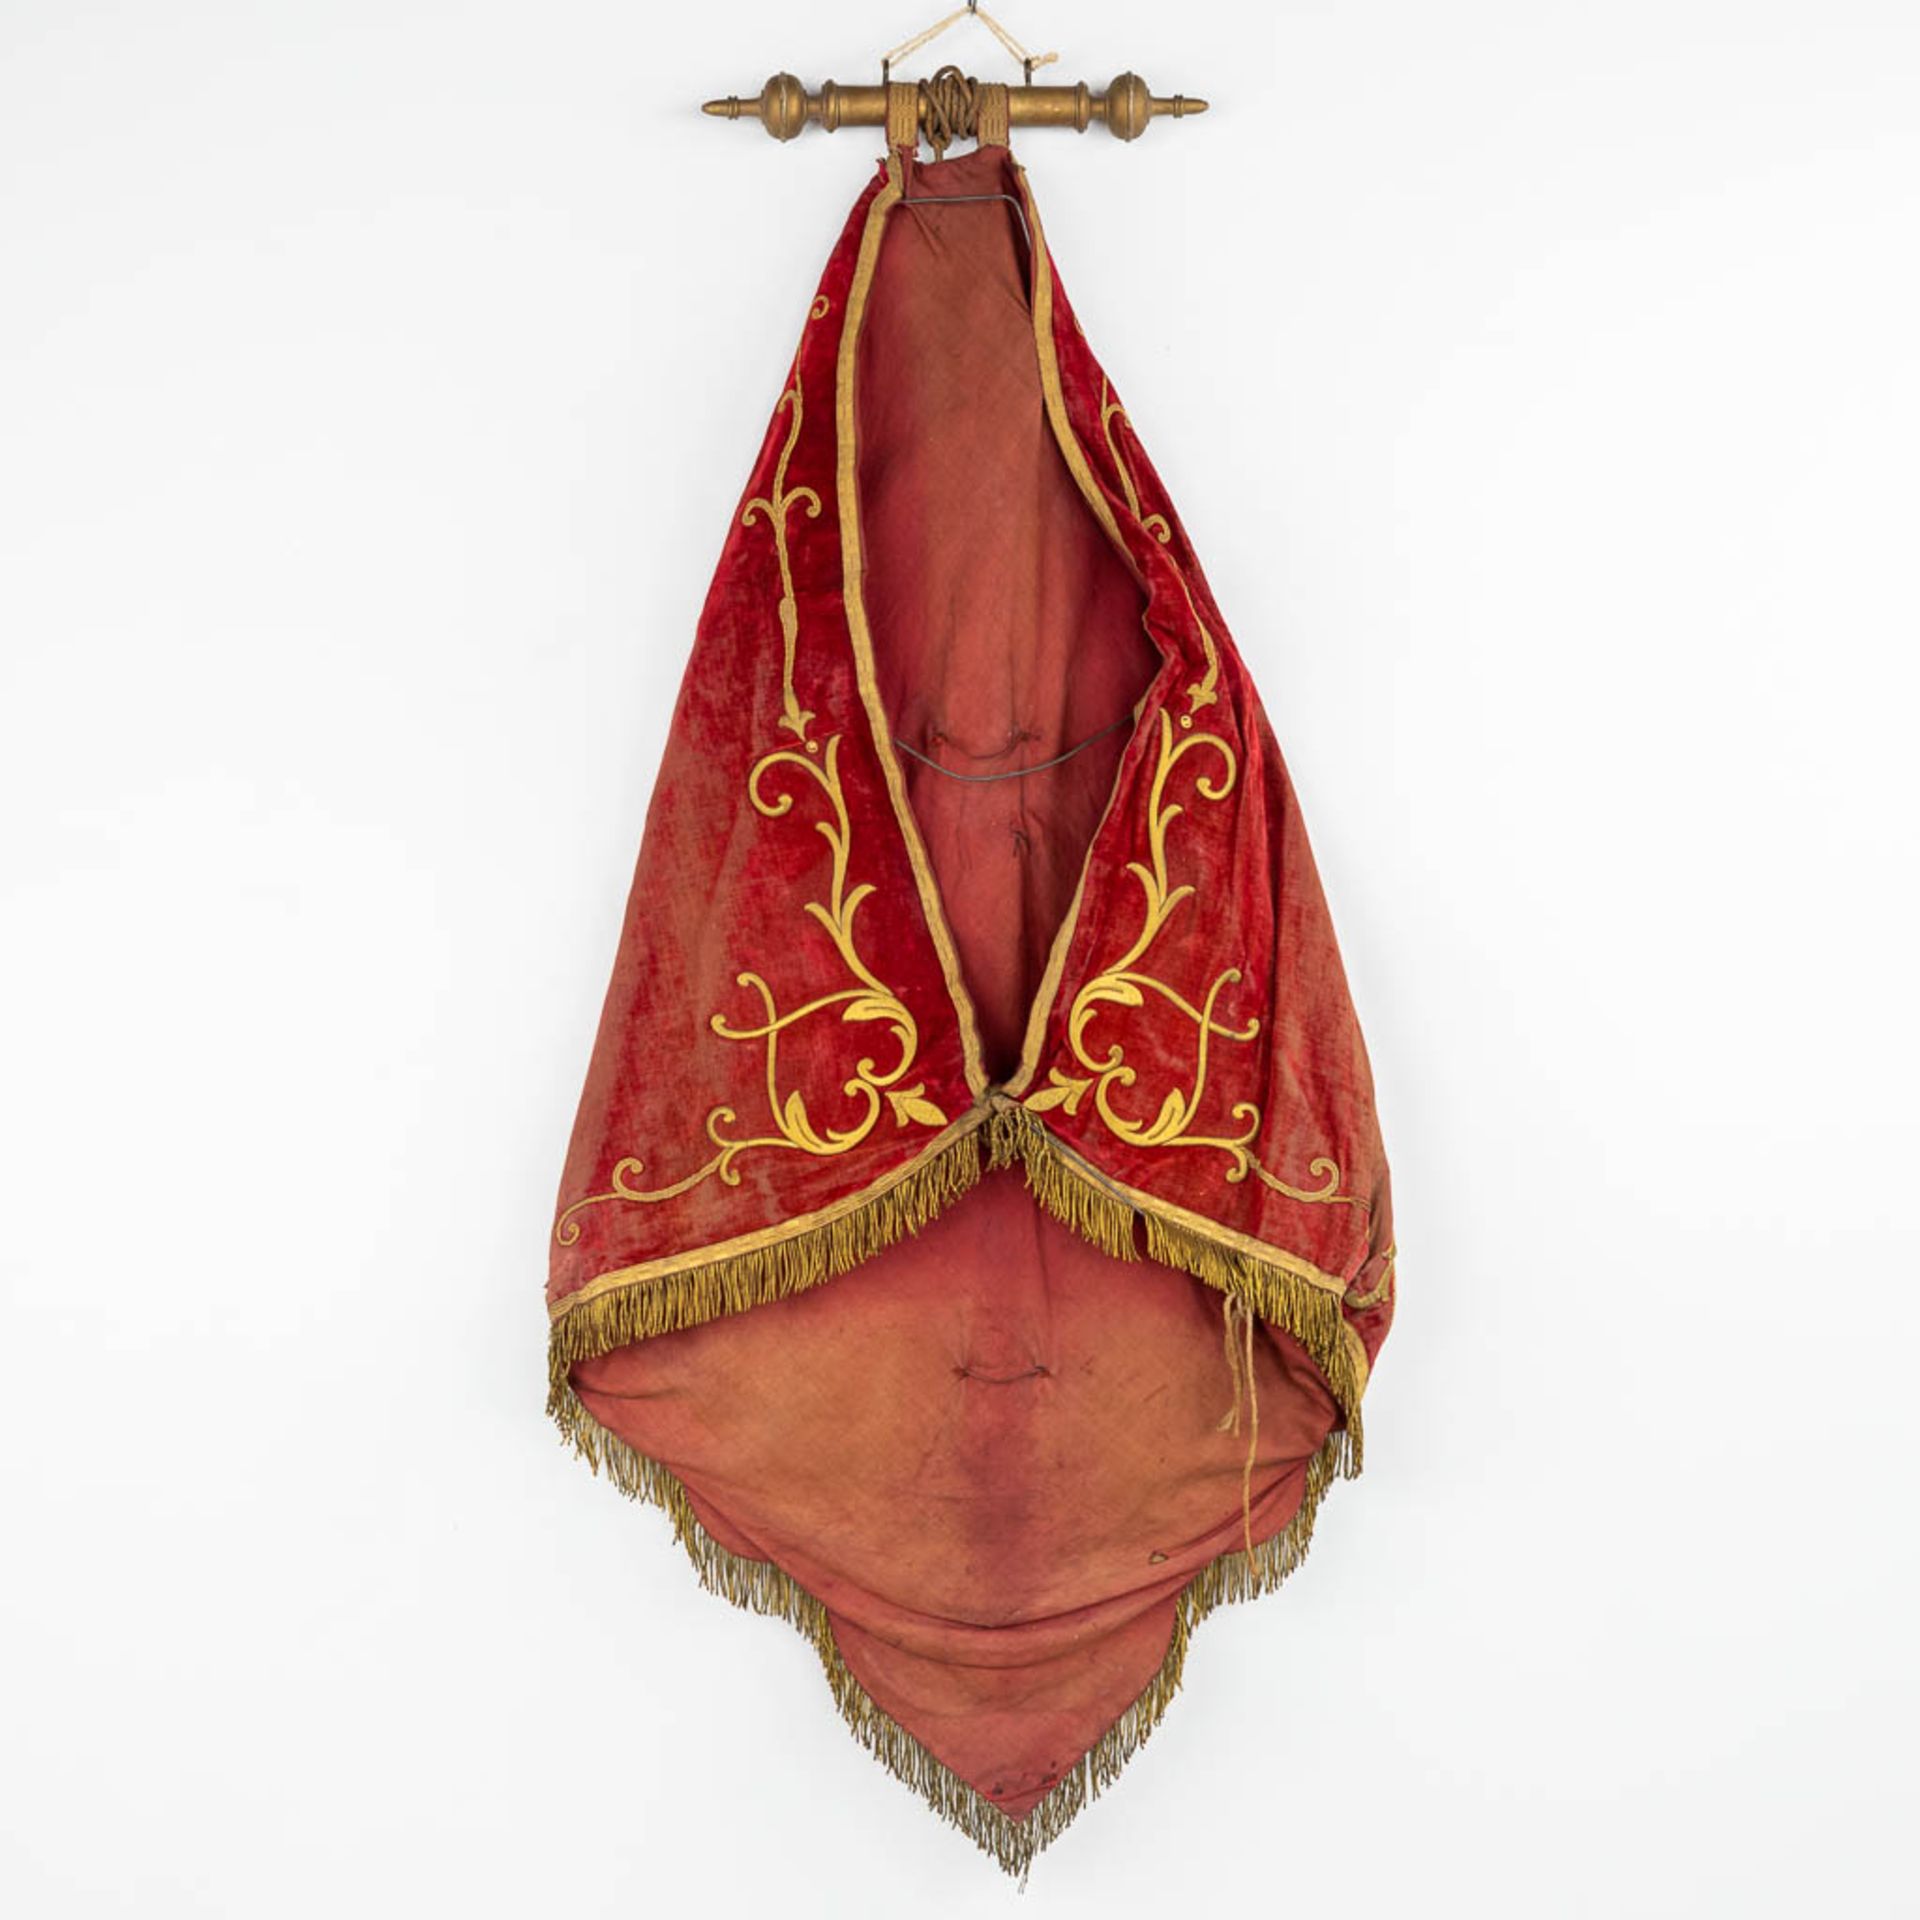 An antique banner, 'Harmonie Saint Germain, Couvin', and used in the front of a marching orchestra. - Image 9 of 10